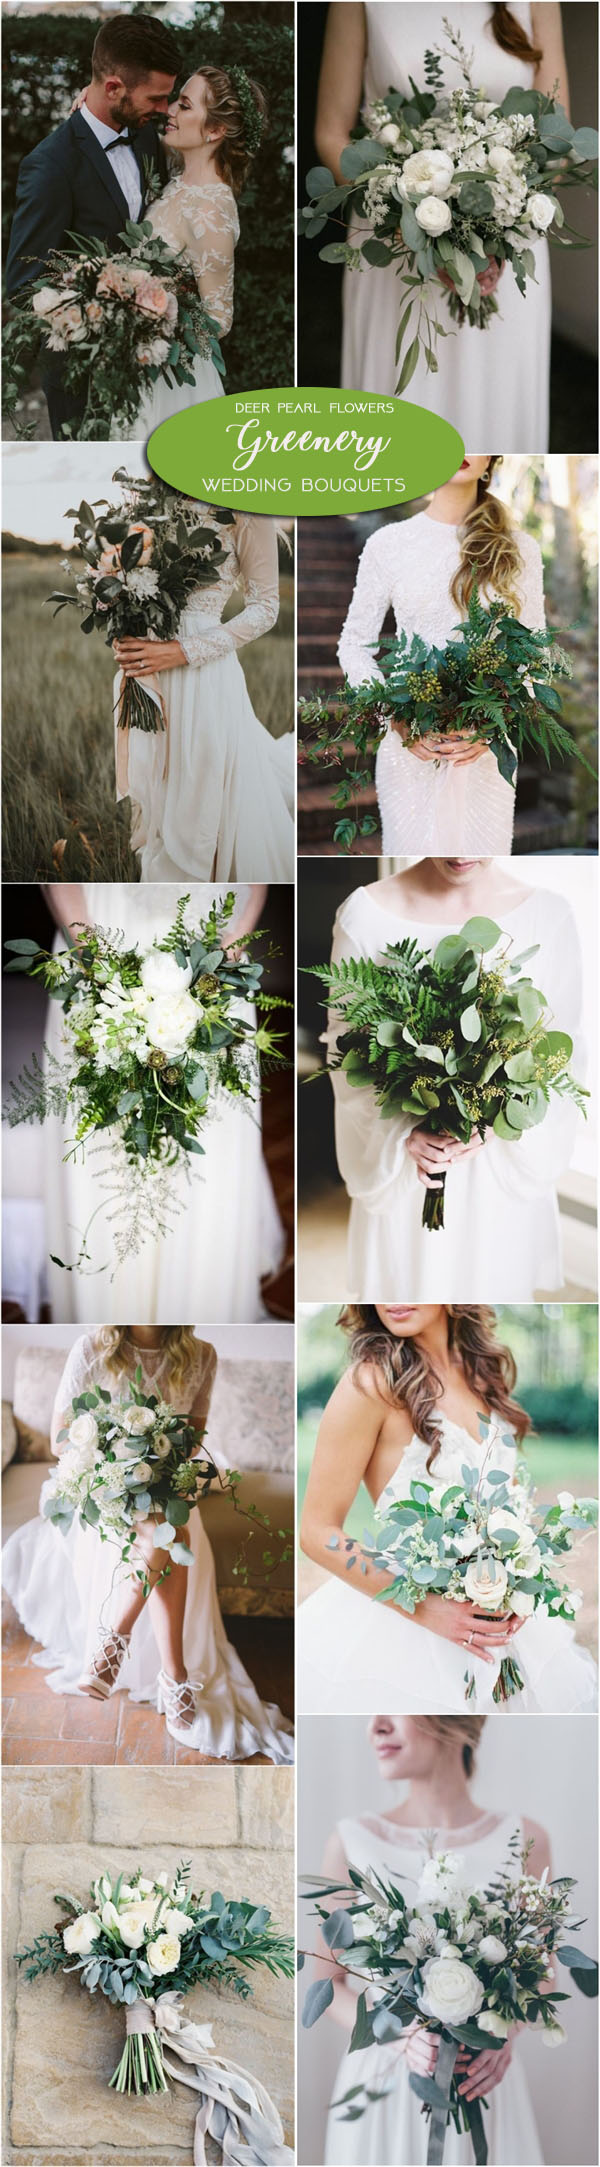 Greenery wedding bouquets and flowers